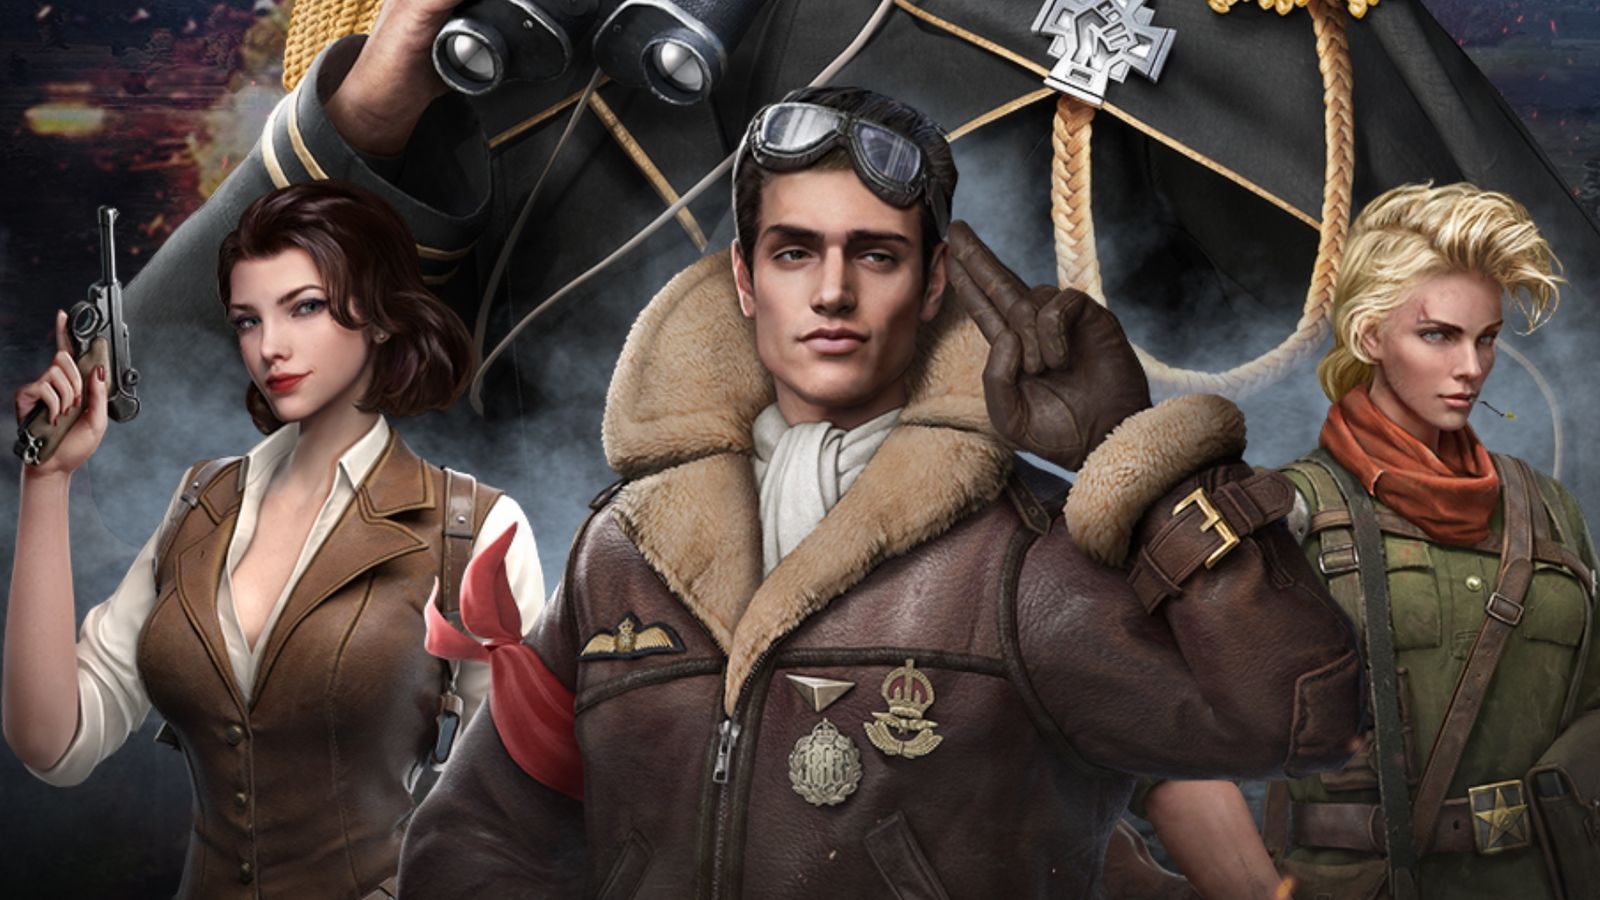 Screenshot from Warpath codes, featuring three pilots in military uniform